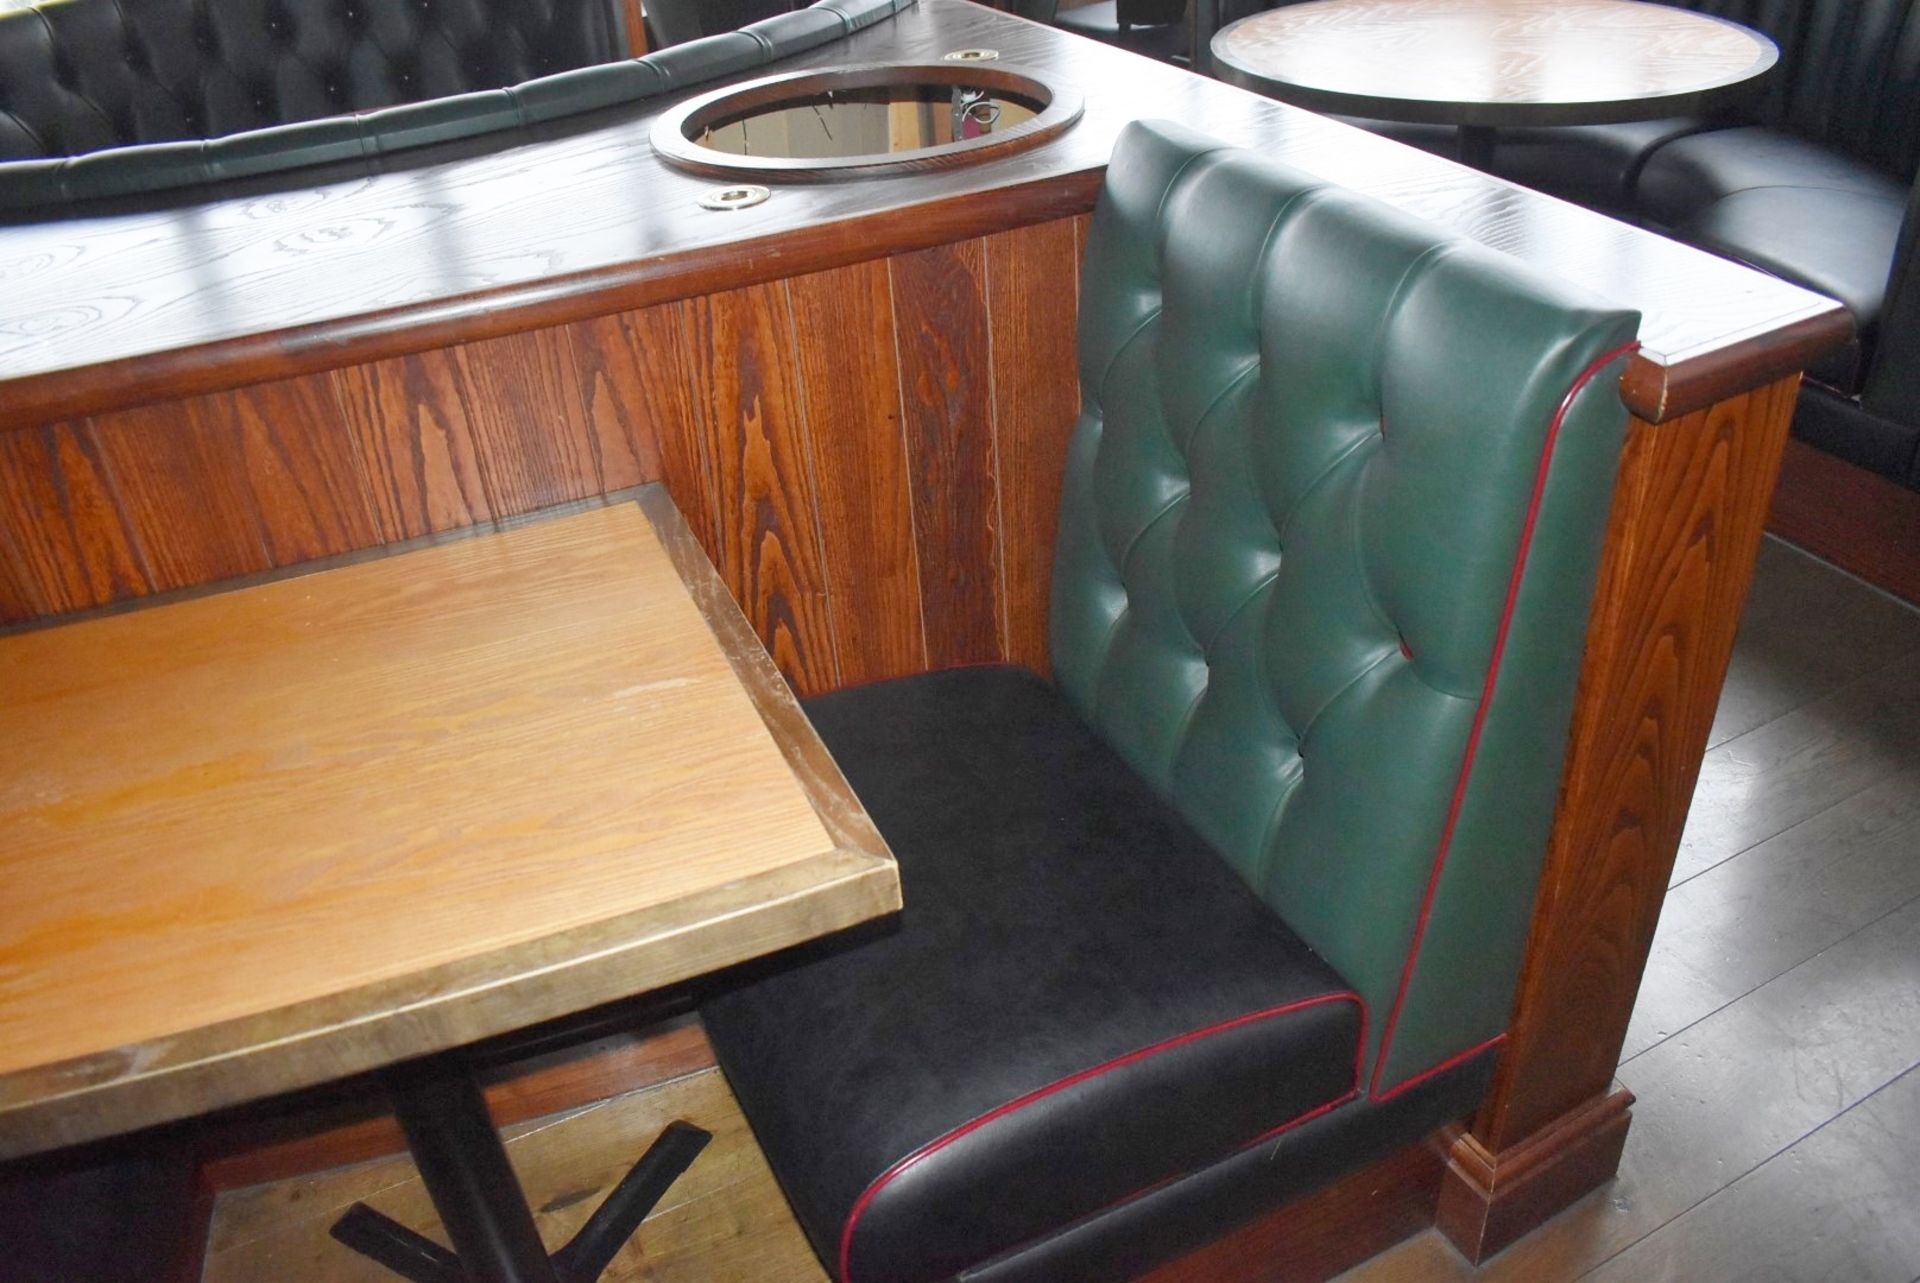 3 x Sections of Restaurant Single Seat Booth Seating With 2 x Tables - Image 9 of 9